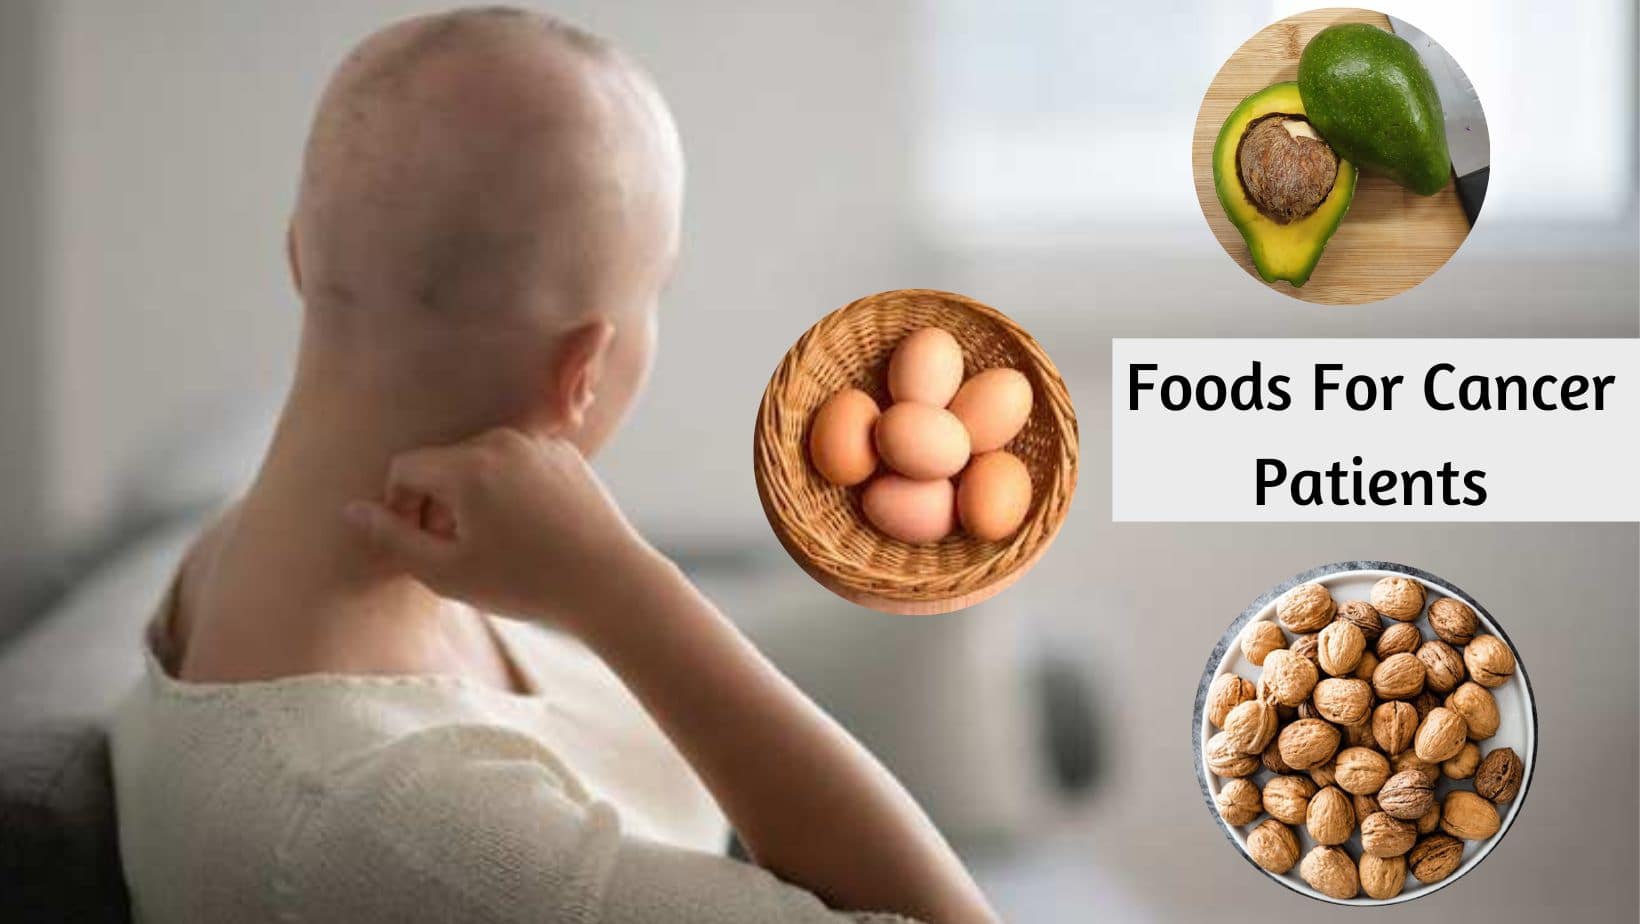 Foods For Cancer Patients: 7 Foods To Eat During Chemotherapy